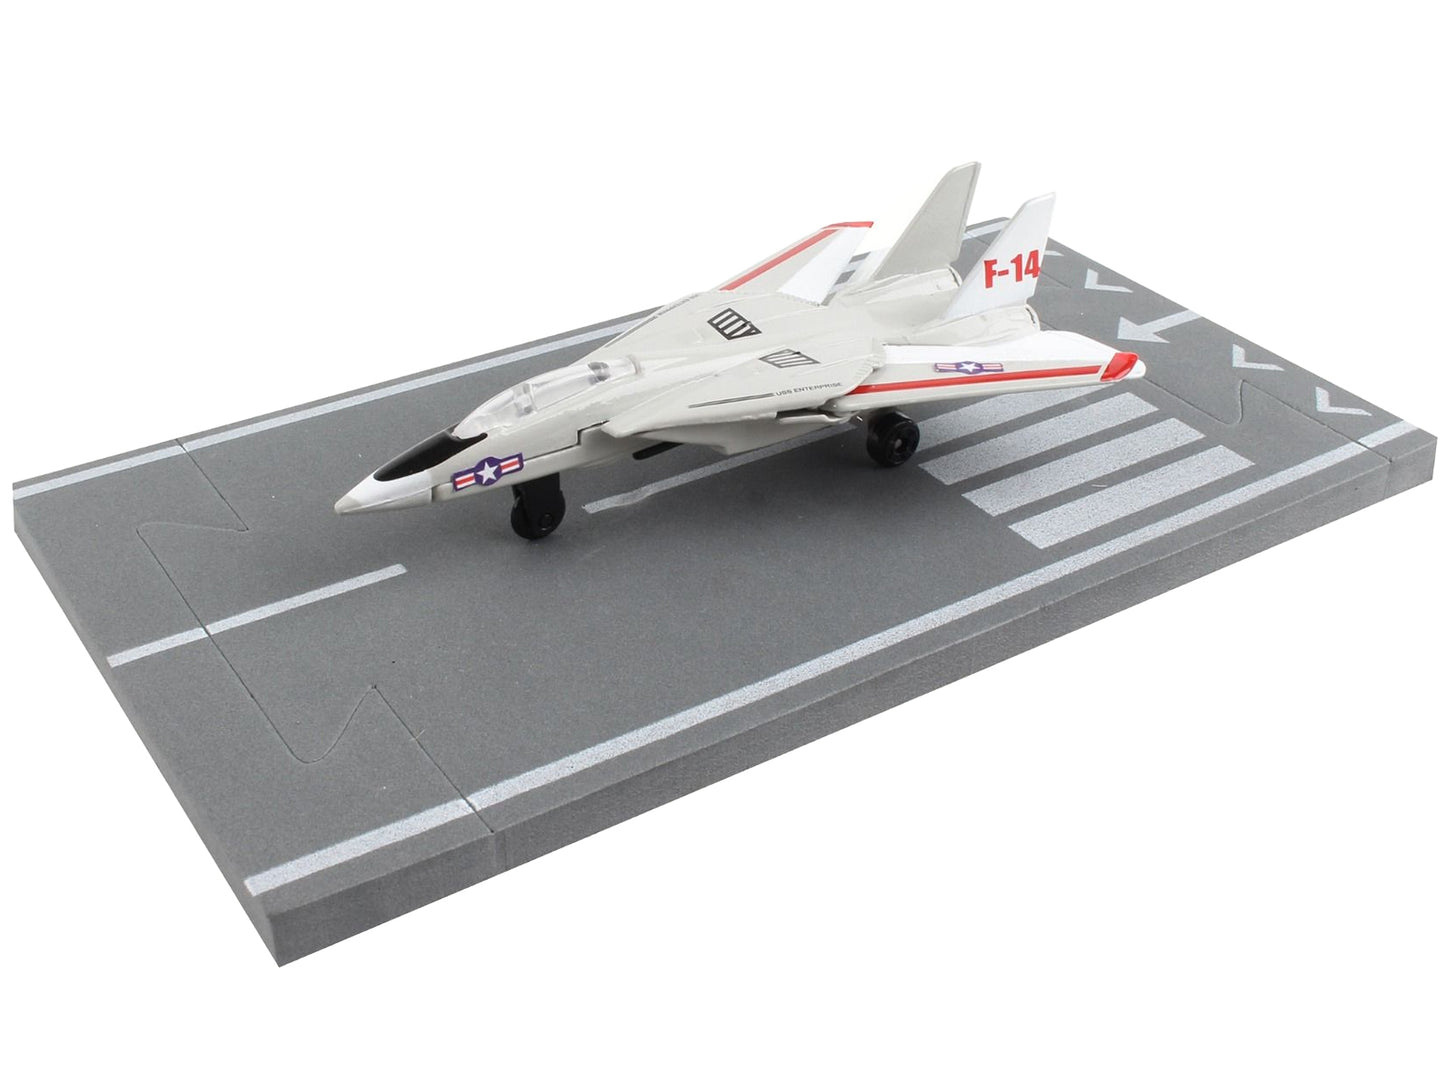 Grumman F-14 Tomcat Fighter Aircraft Gray with Red Stripes "United States Navy Test Aircraft" with Runway Section Diecast Model Airplane by Runway24